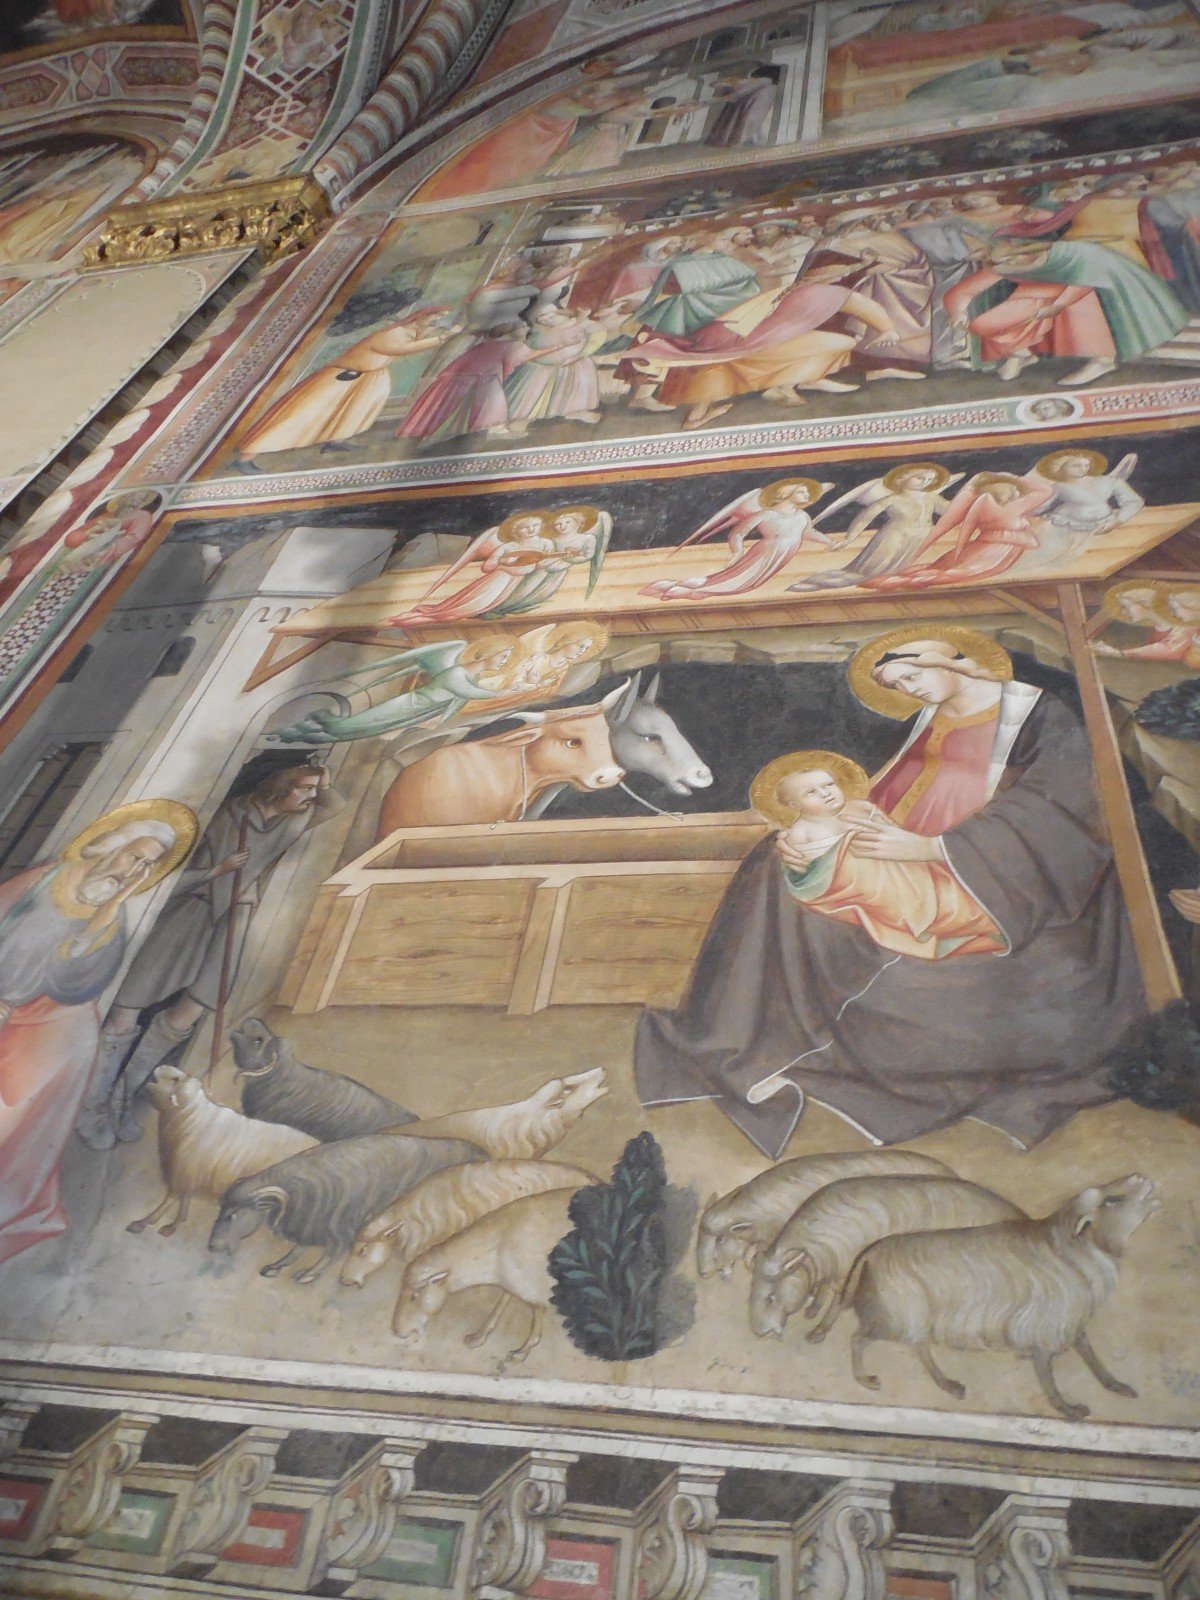 Prato Cathedral, Chapel of the Holy Girdle, frescoes by Agnolo Gaddi (1392-95)